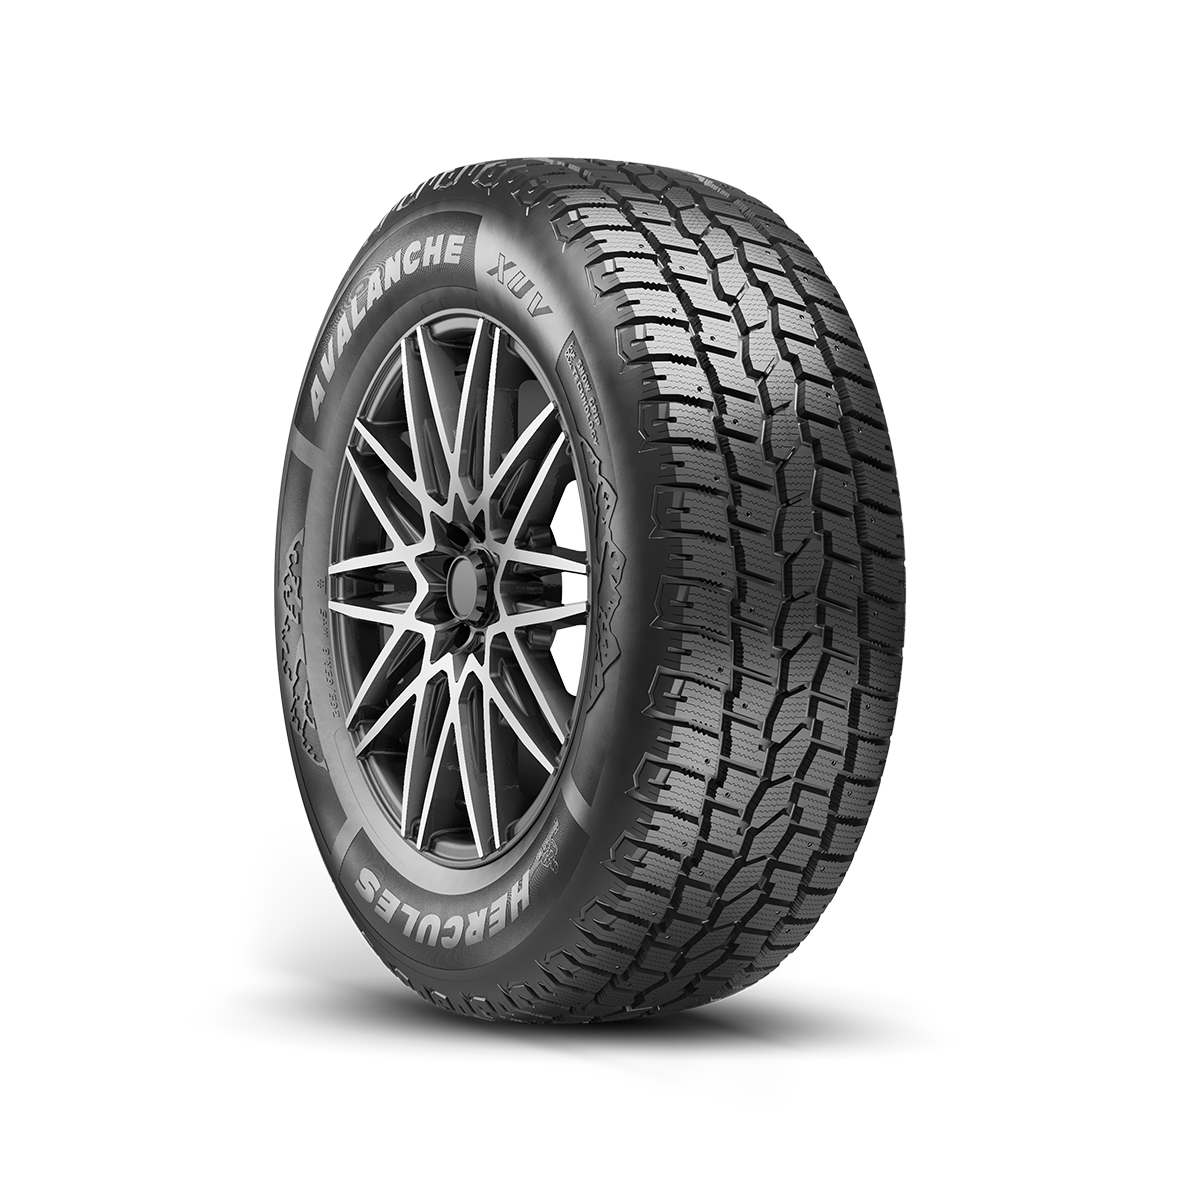 Right side read and rim view of the Avalanche XUV tire on a white background.